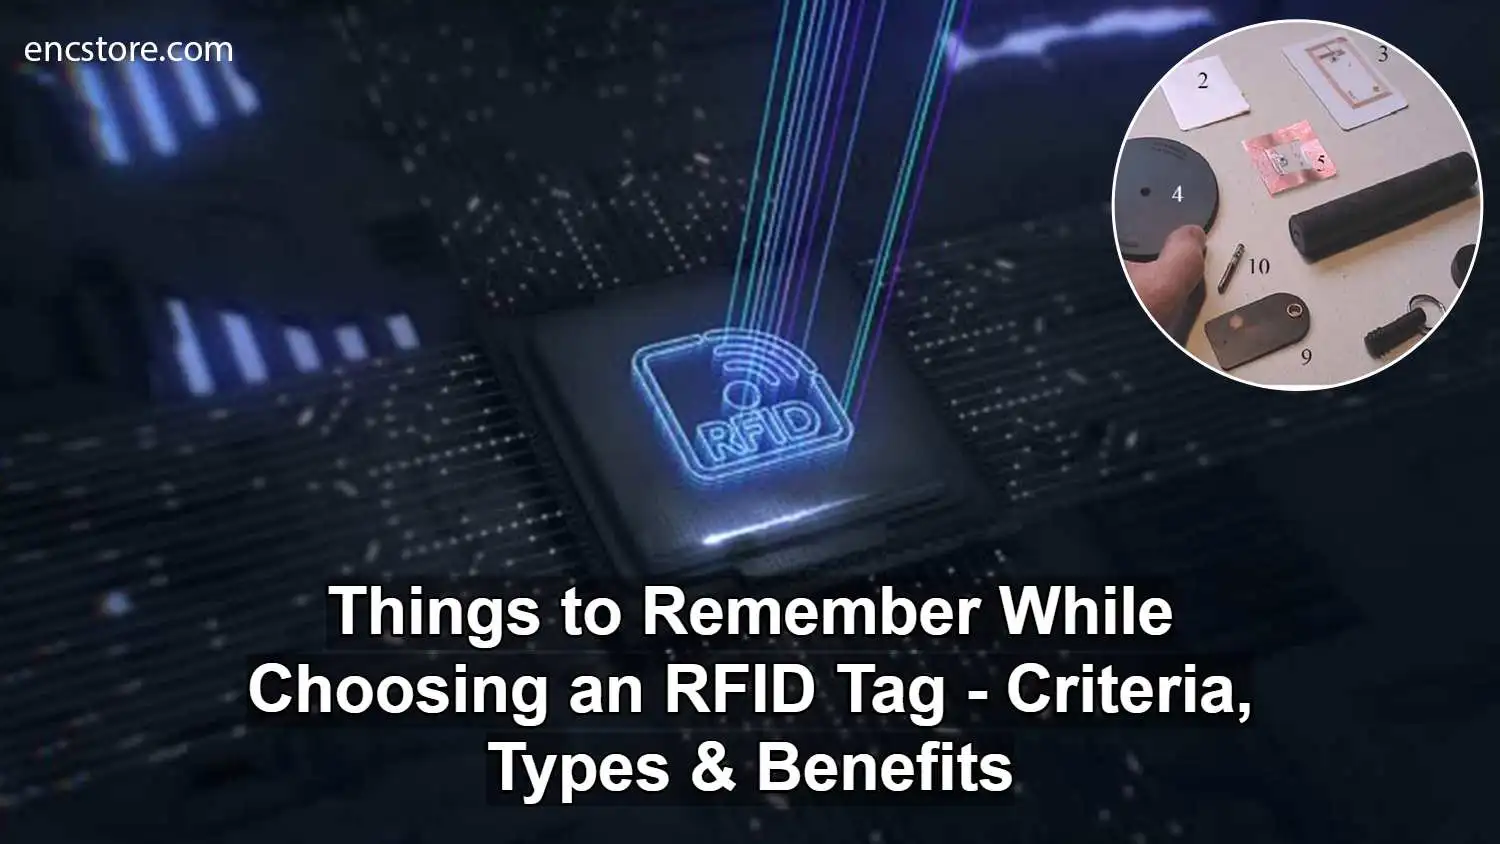 Things to Remember While Choosing an RFID Tag 